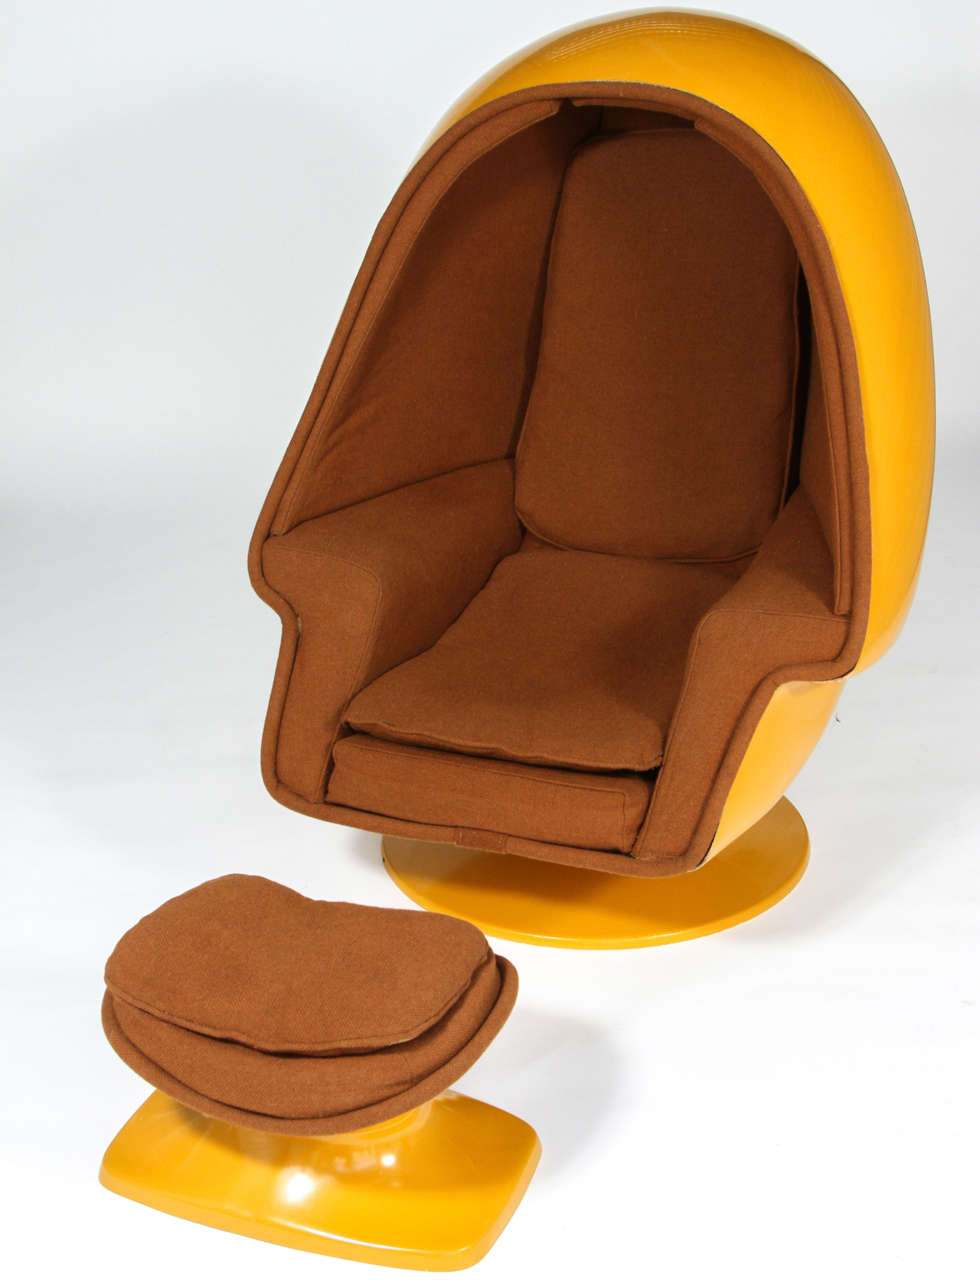 Rare Vintage Lee West Alpha Egg Chair,  Original mustard yellow fiberglass and Brown Fabric.
In the 1970s was an important decade for the egg chair. Around the same time that the Egg Sound Chair premiered, Lee West designed the Alpha Chamber egg